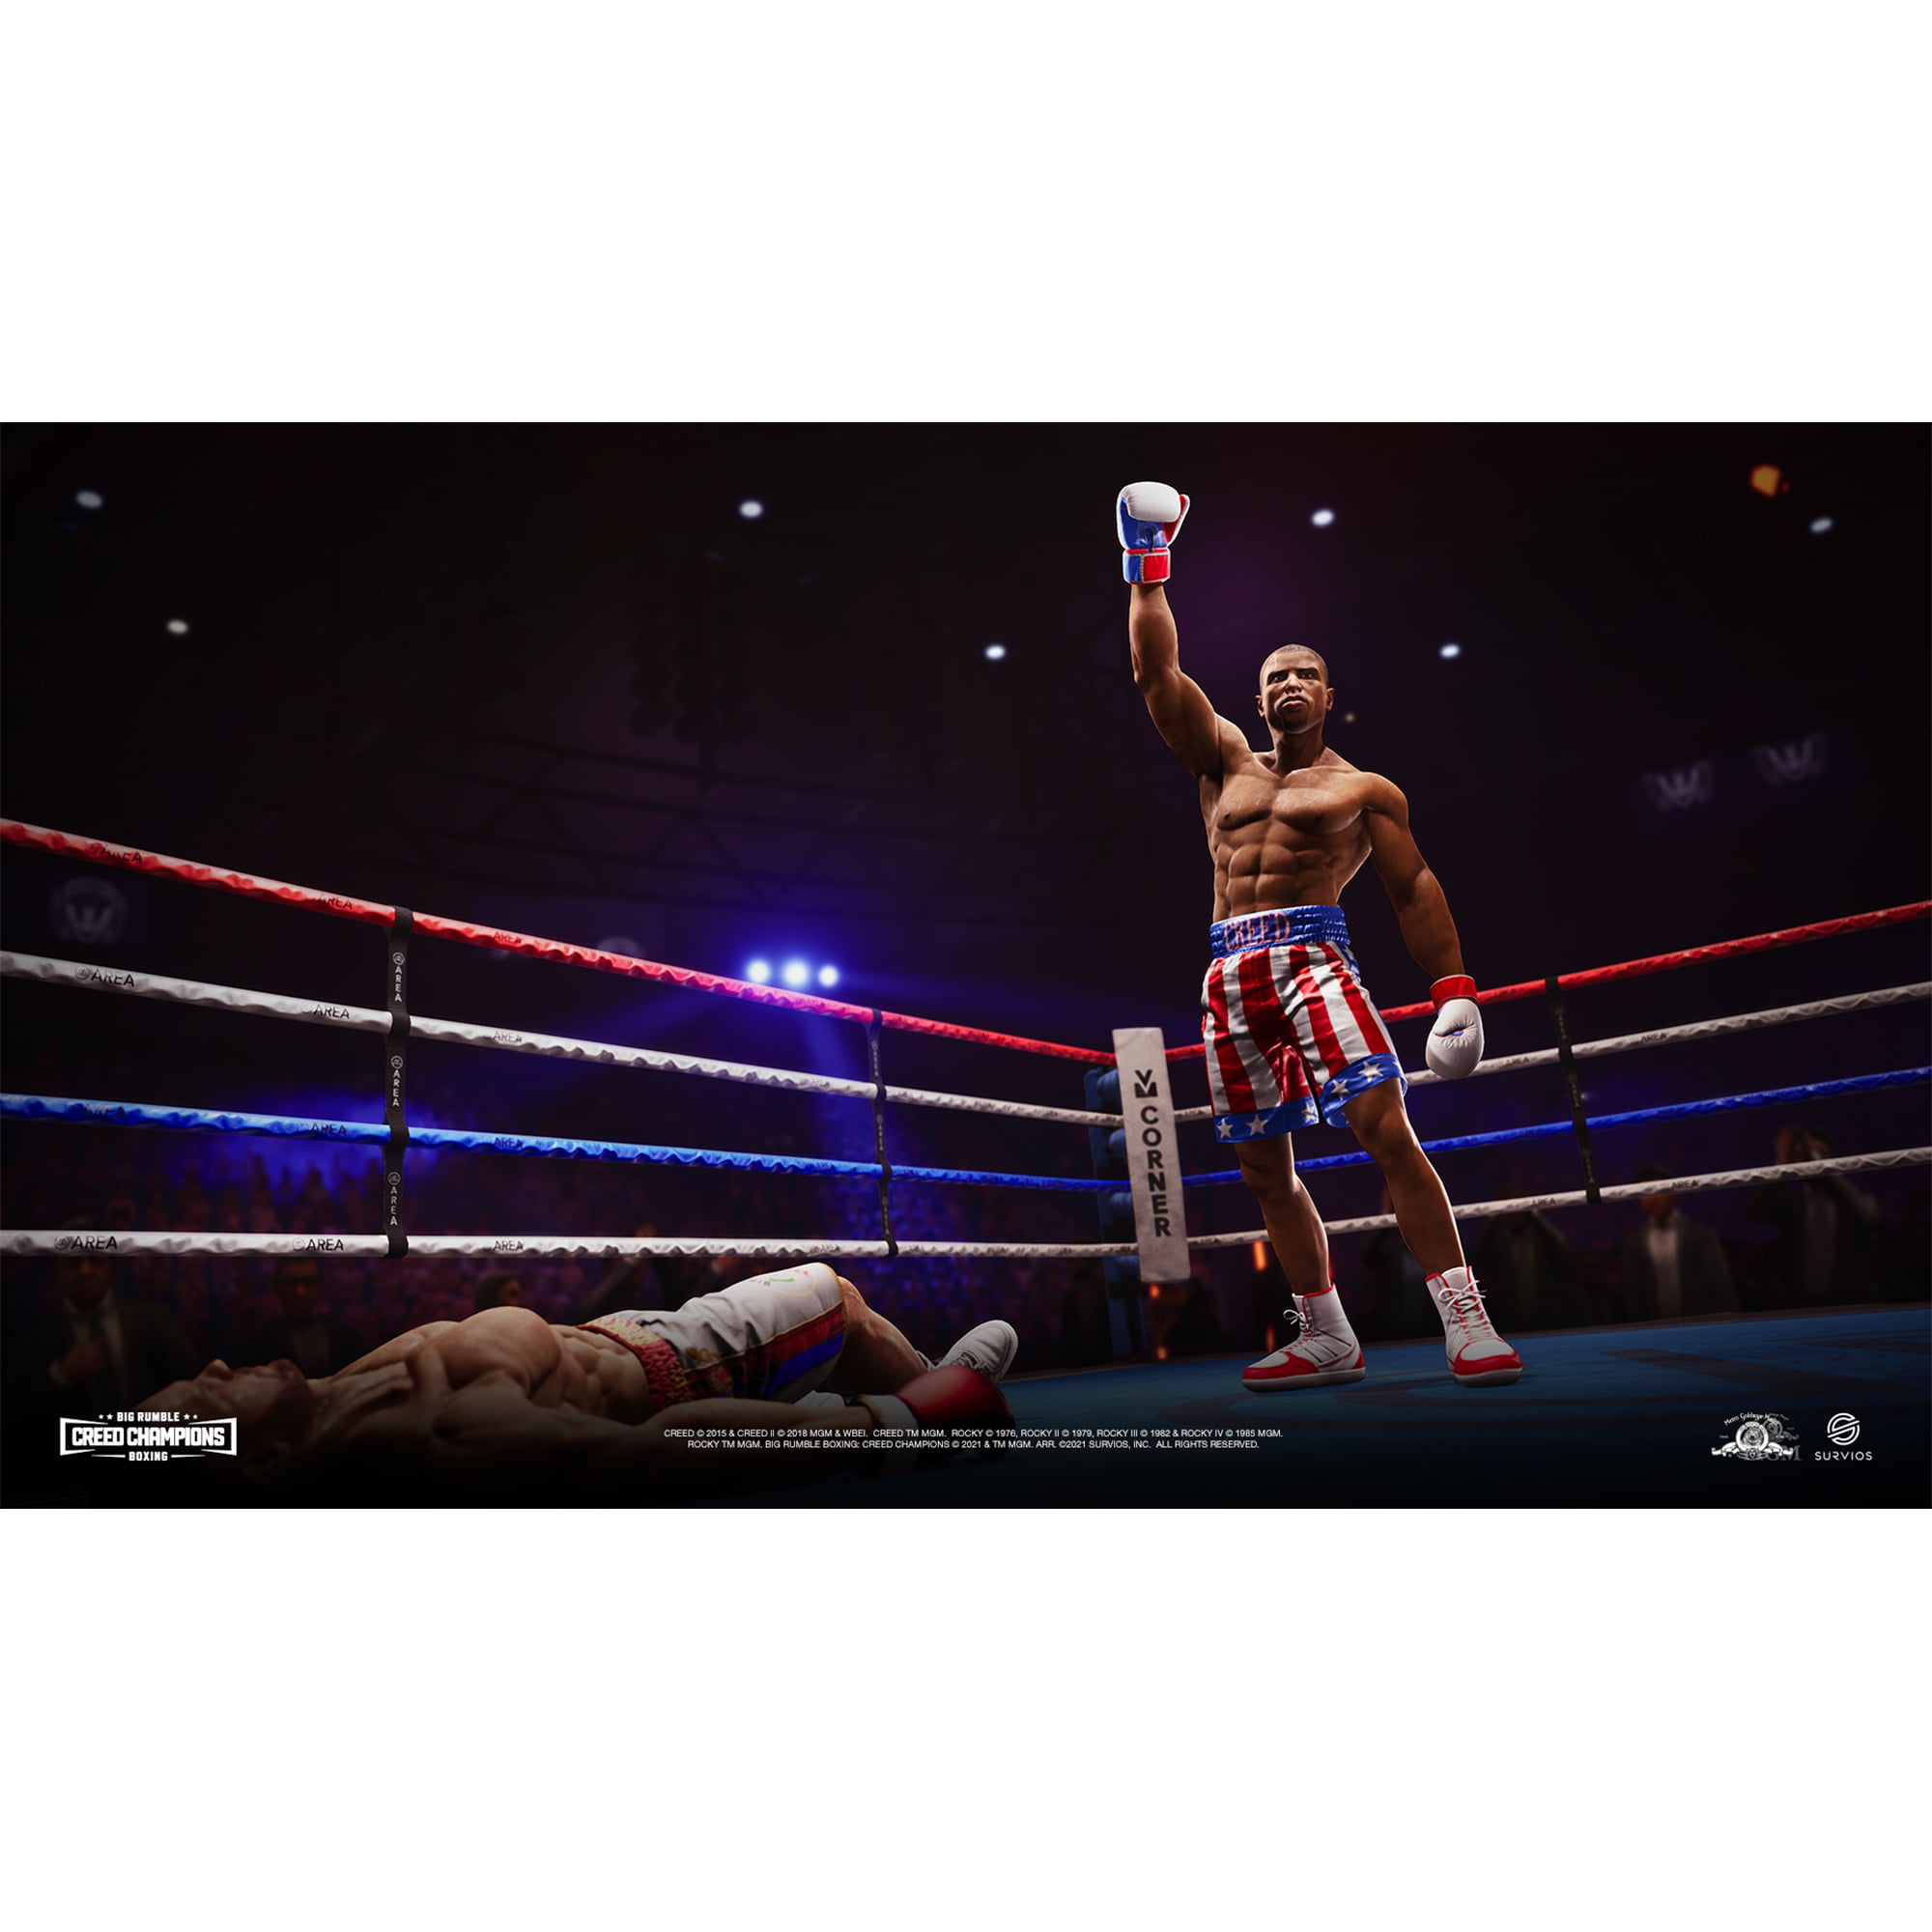 10 Best Adonis Creed wallpapers for iPhone in 2023 - iGeeksBlog